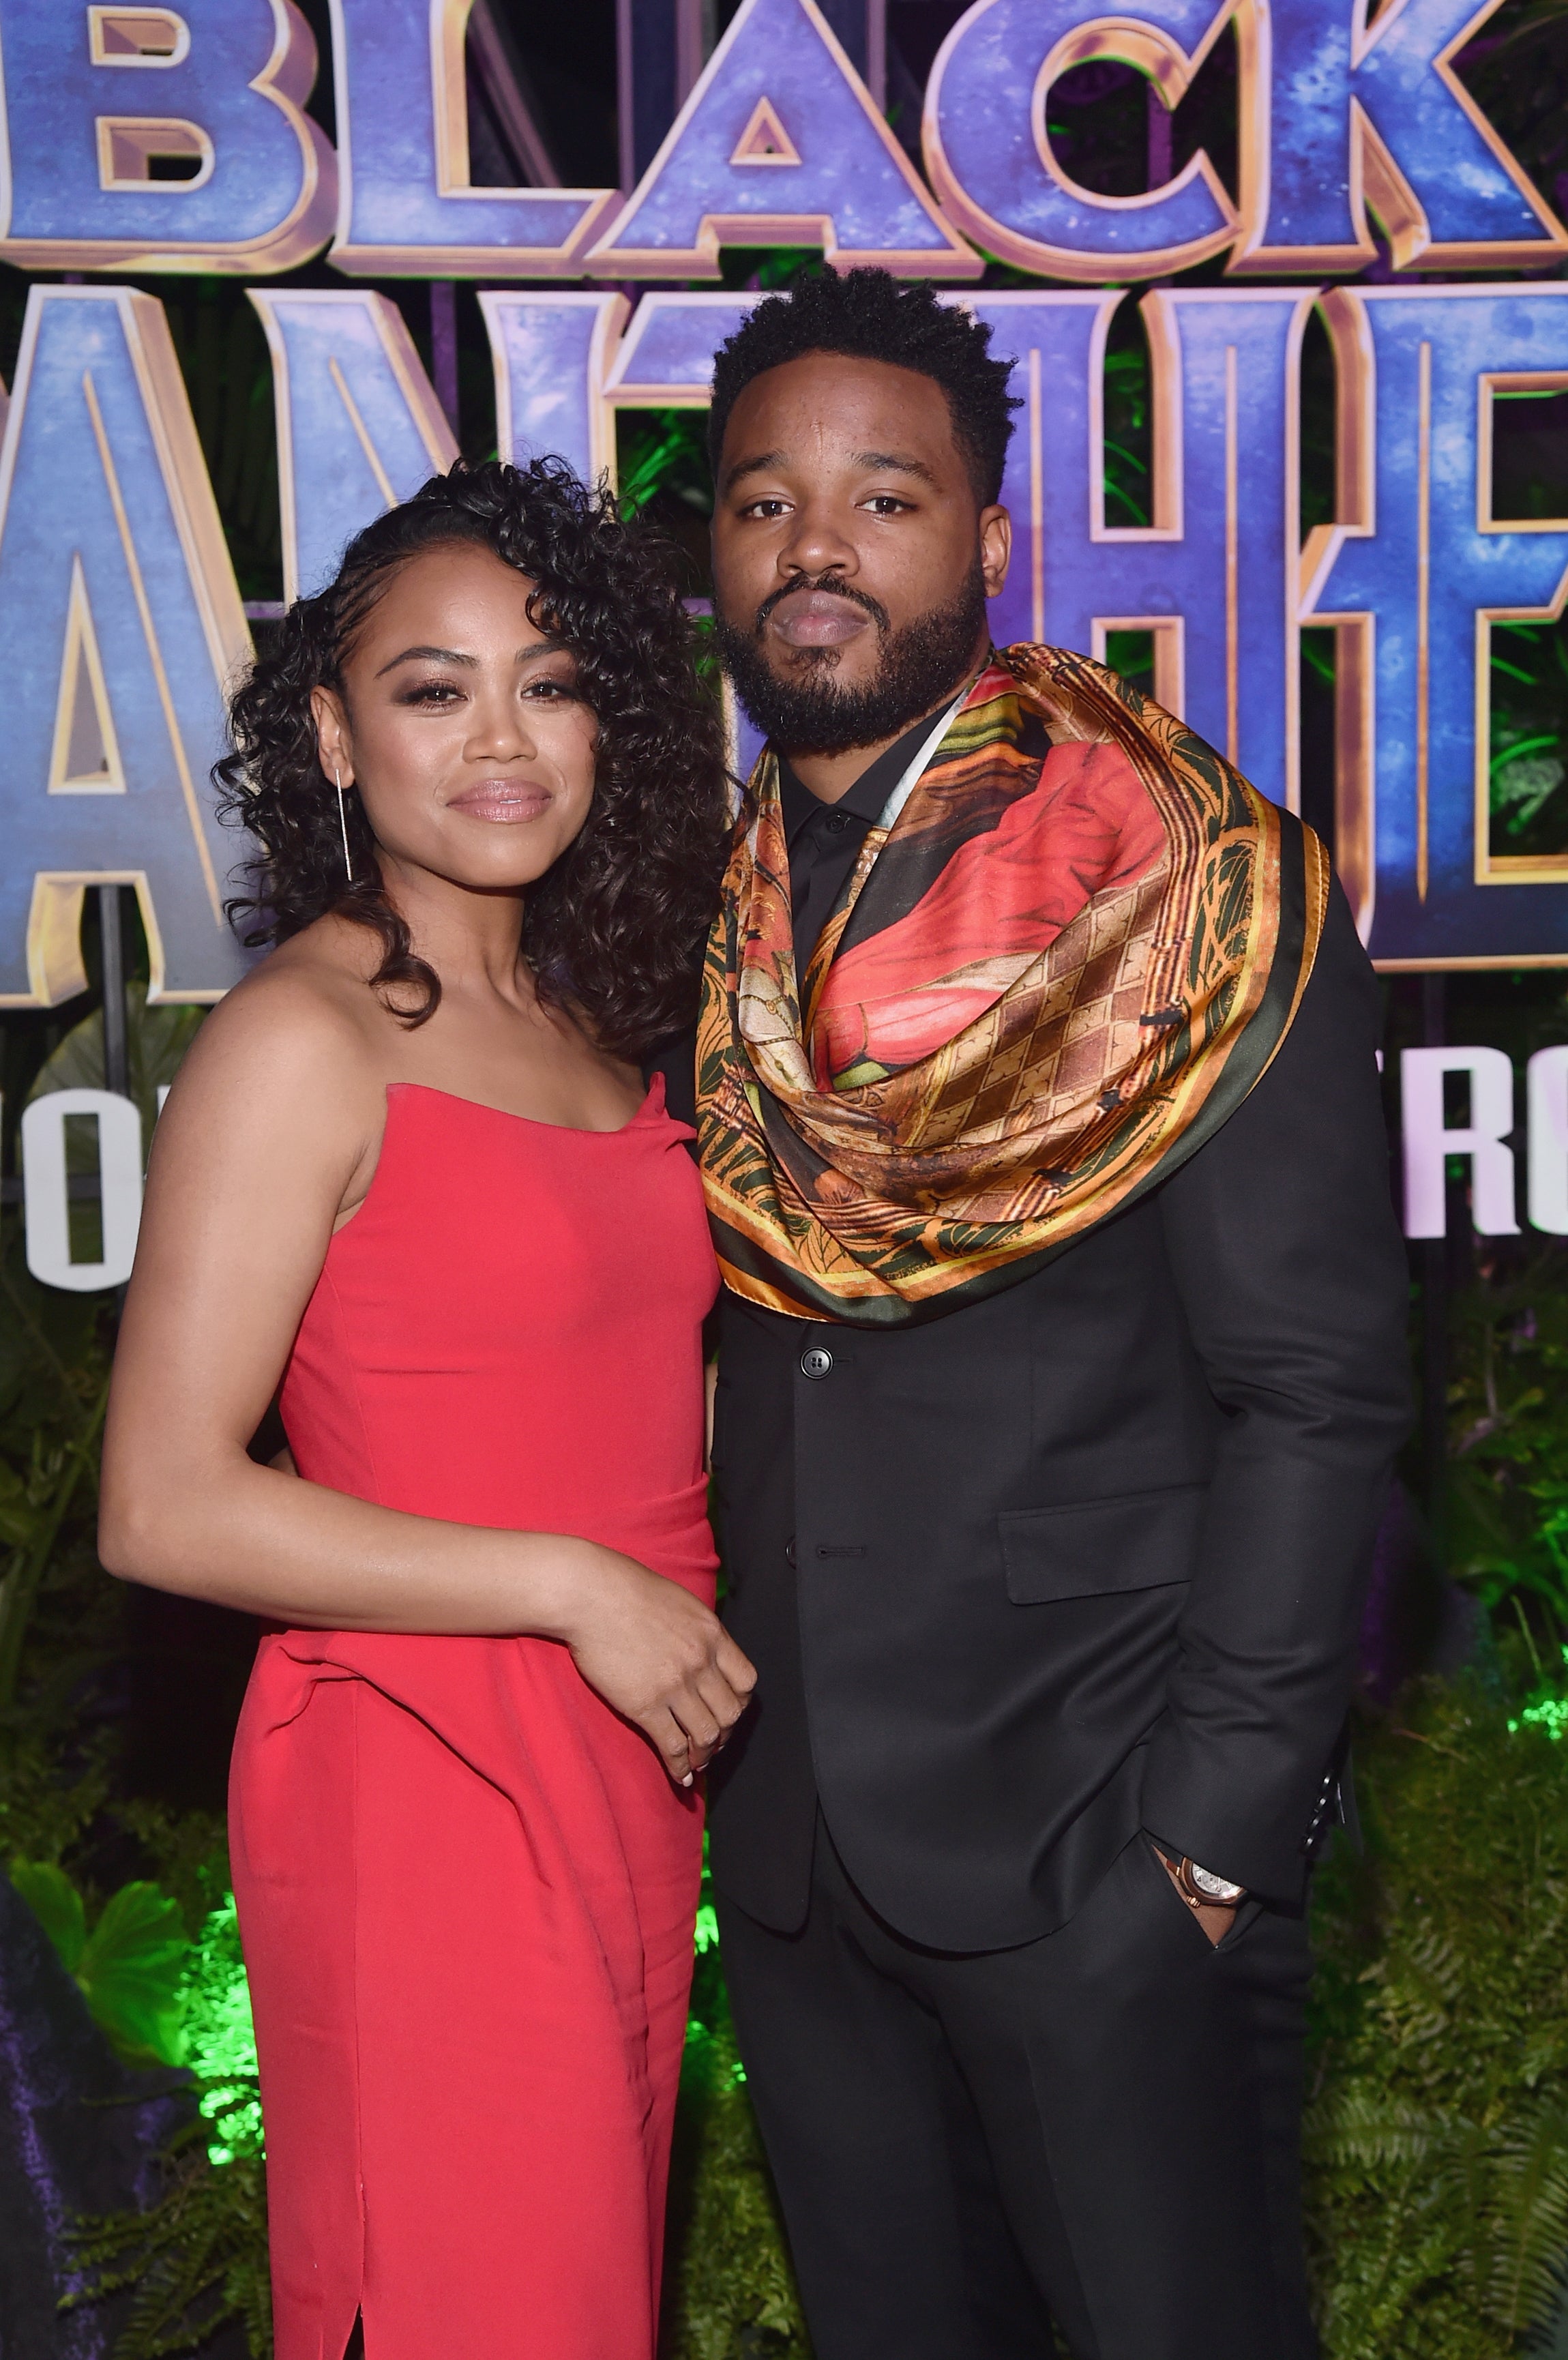 10 Adorable Photos Of ‘Black Panther’ Director Ryan Coogler And Wife Zinzi Evans That Will Make You Feel The Love